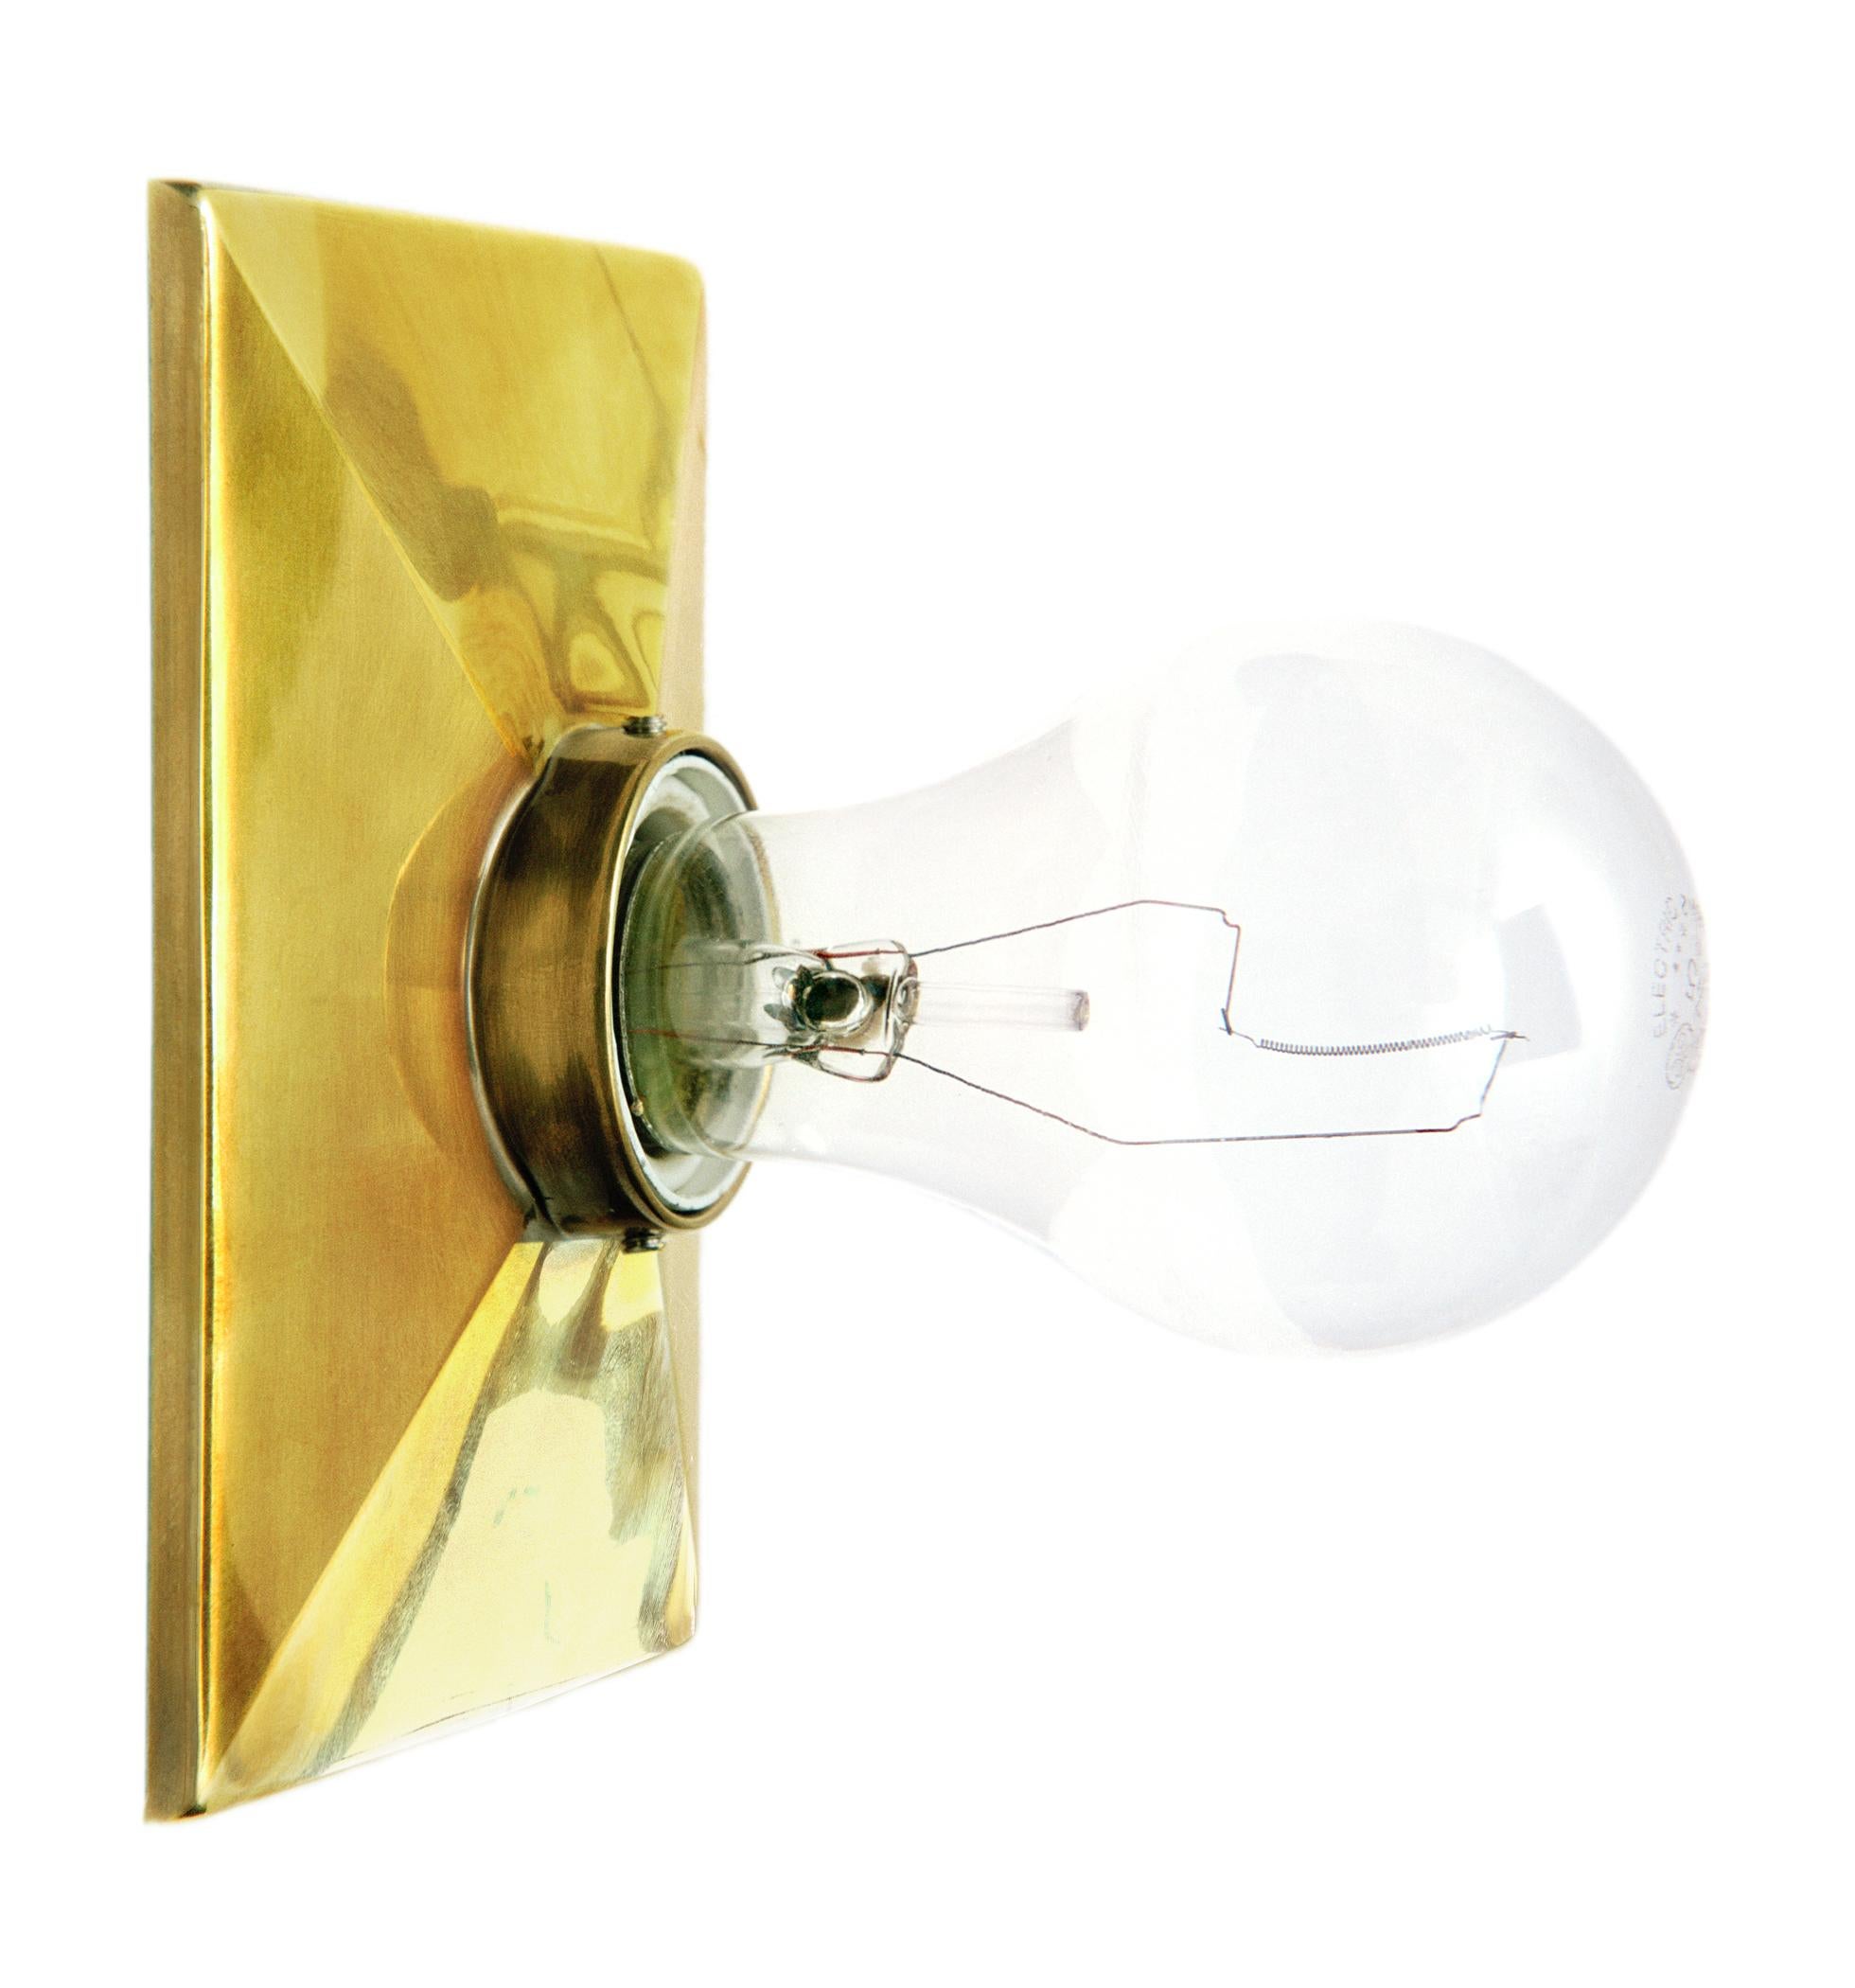 The Escutcheon surface mount features a rectangular cast metal plate with a beveled edge design and a porcelain socket. It can be wall or ceiling mounted. 

The maximum wattage bulb recommended is 60W. The Escutcheon is UL listed.

Handcrafted